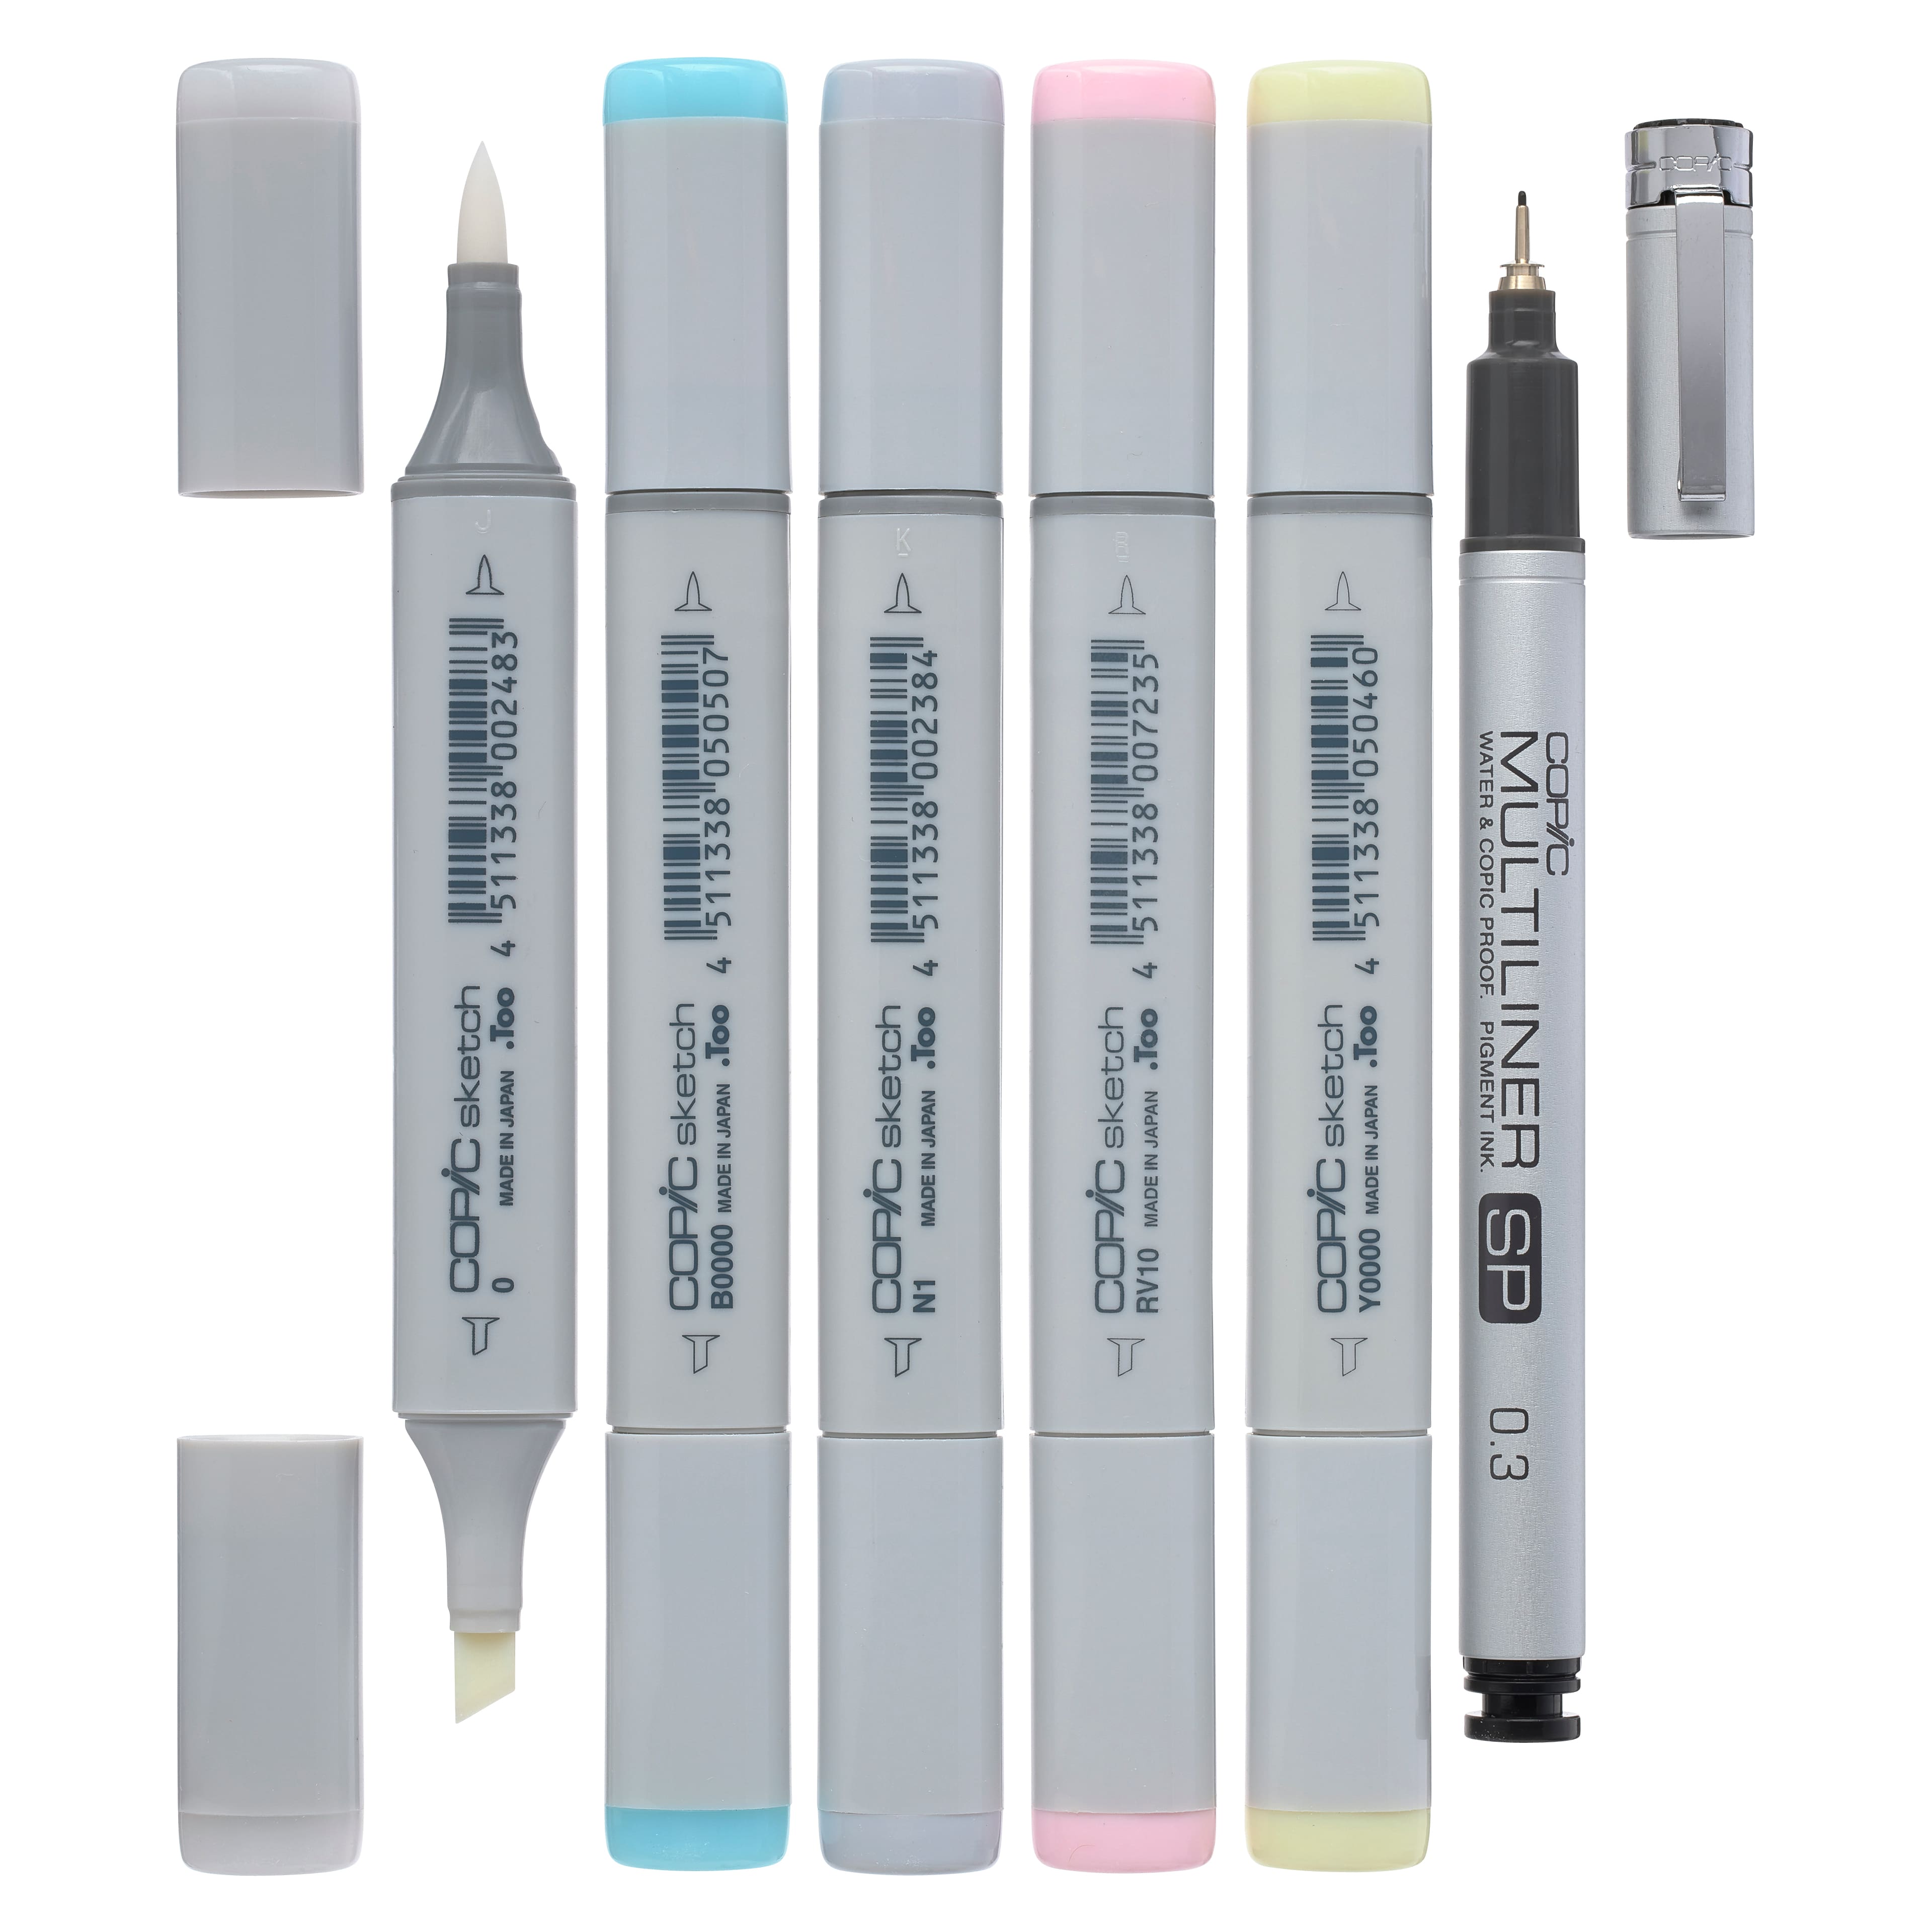 Copic Sketch 6 pc Marker Set, Floral Favorites 1, Dual-Tipped